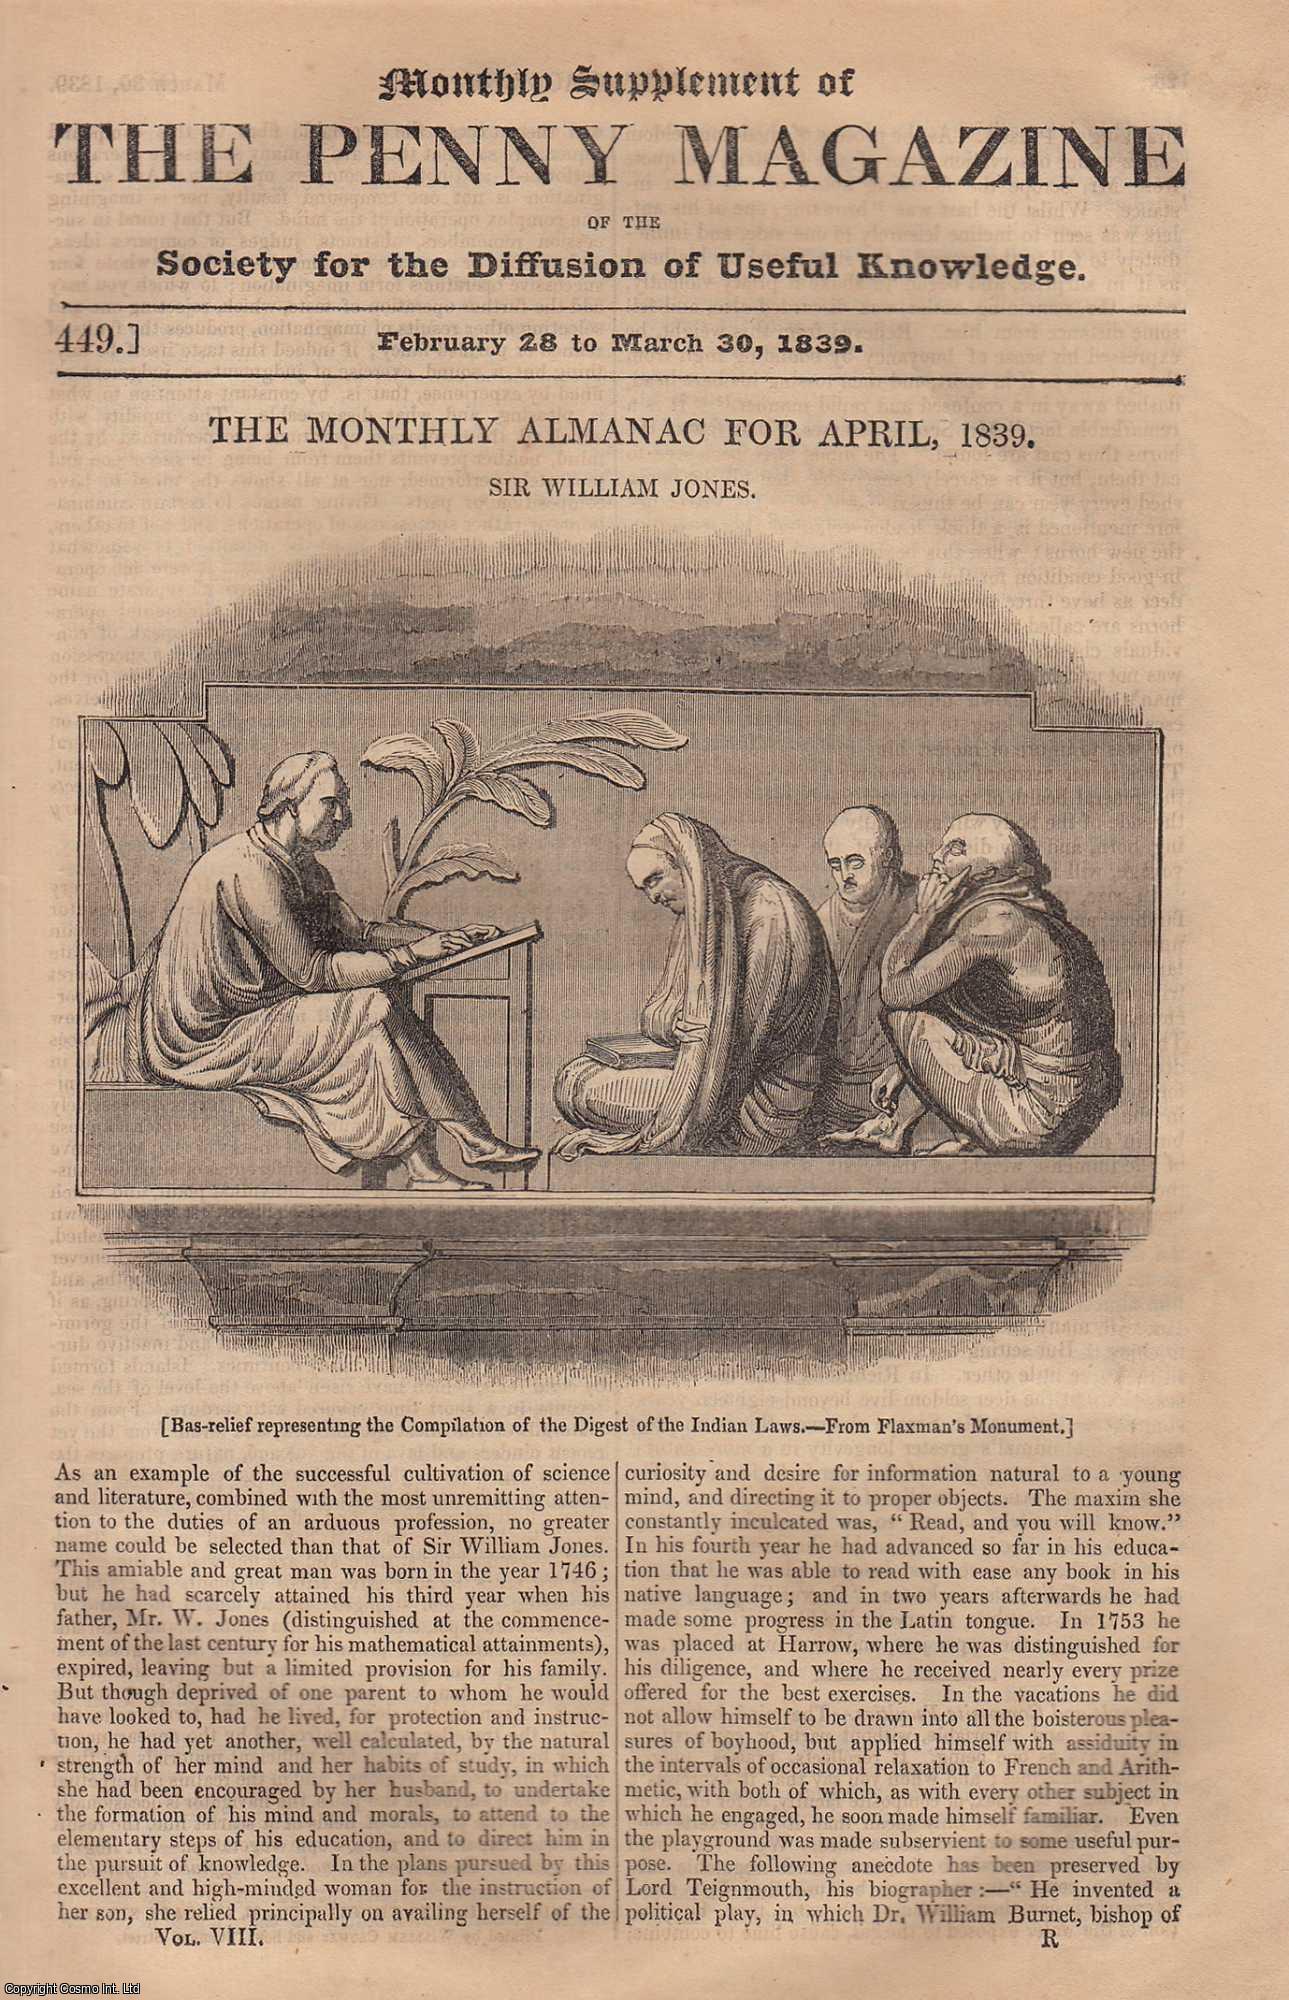 ---. - Sir William Jones (Asiatic Society of Bengal); The Cuckoo (bird); Utility of The Earth-Worm, etc. Issue No. 449, 1839. A complete rare weekly issue of the Penny Magazine, 1839.